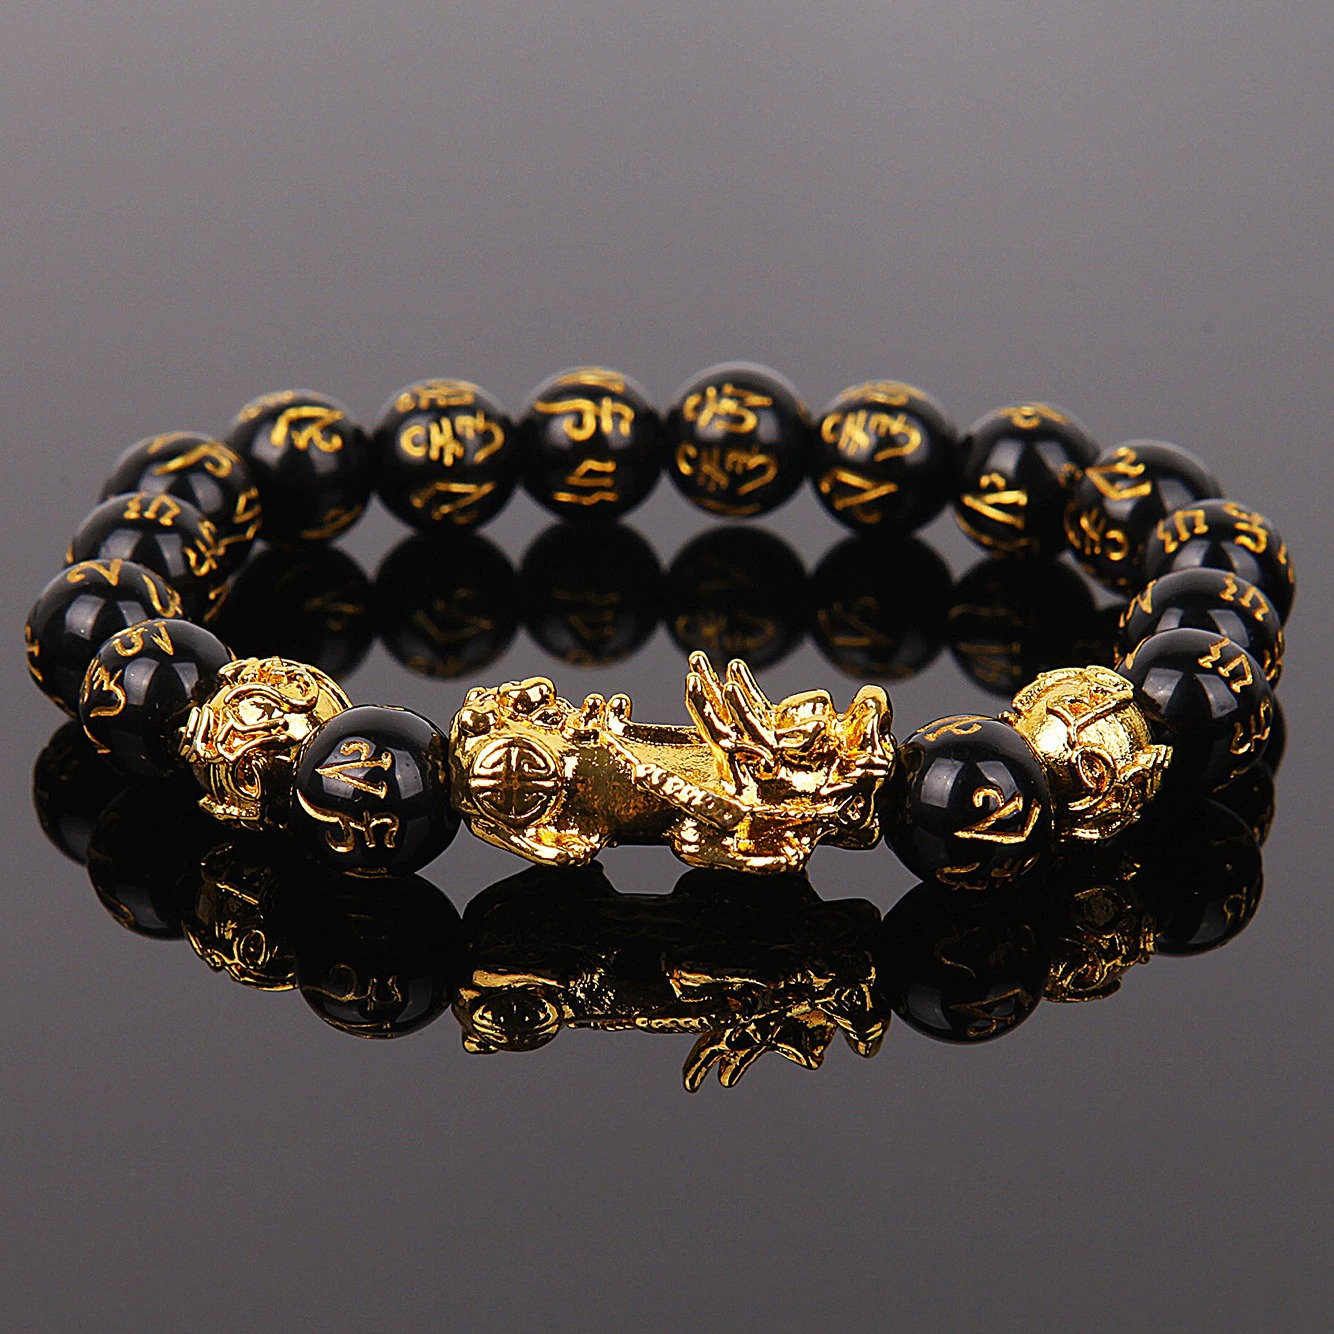 Money Stone Collection Feng Shui Black Obsidian PixiuOm mani Bracelet  Wealth Good Luck Dragon with Gold Plated Pi XiuPi Yao Attract Luck and  Wealth Beads Size SinglePixuBracelet  Amazonin Jewellery